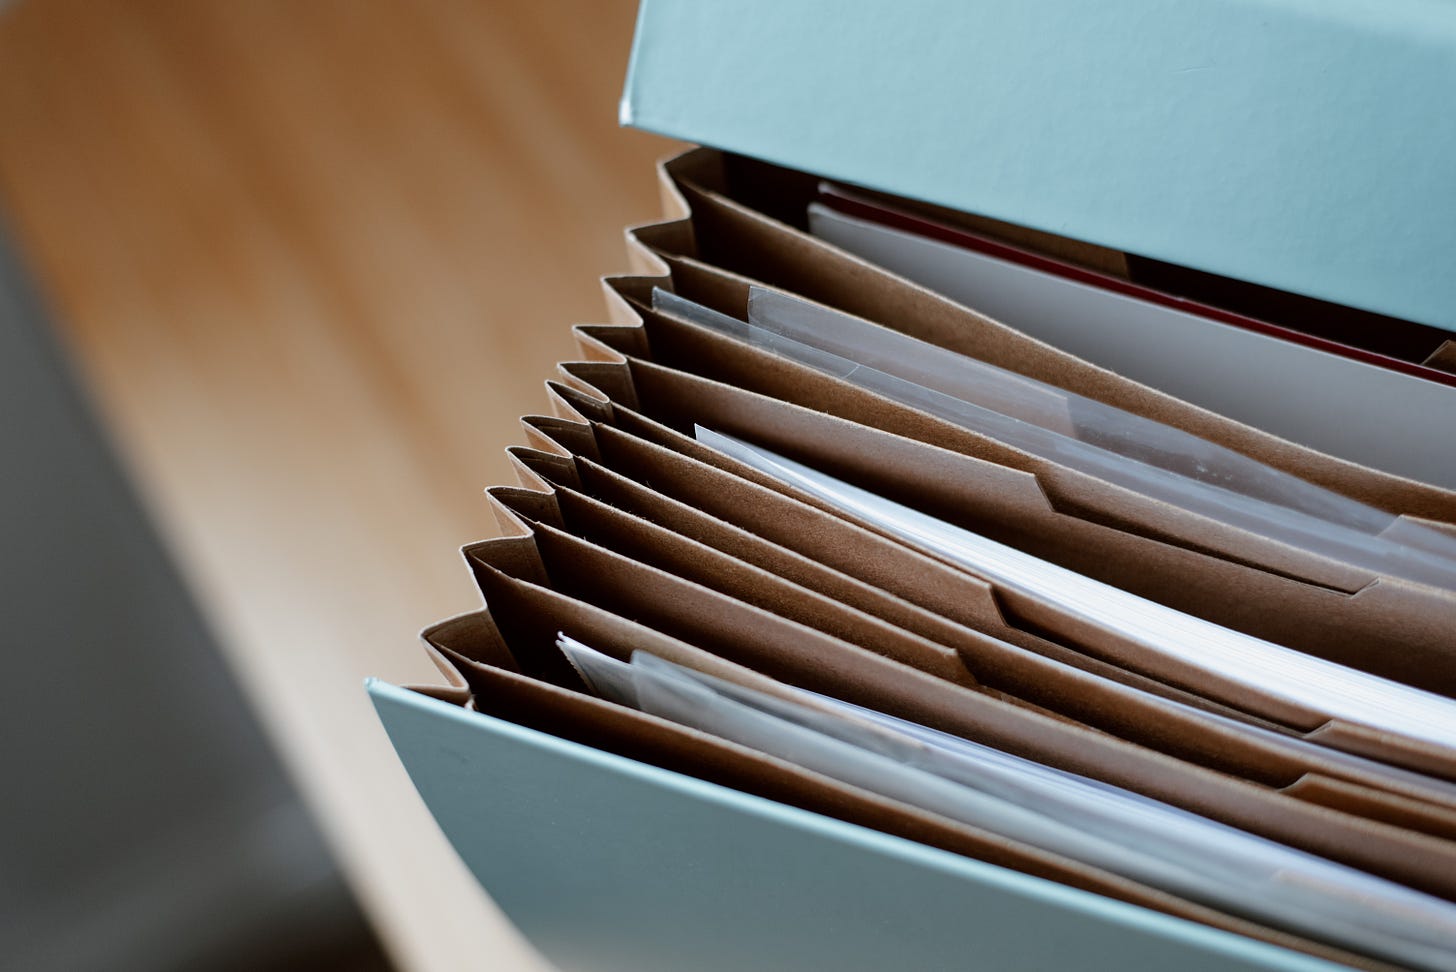 A blue container with brown file folders. White papers are inside some of the folders.